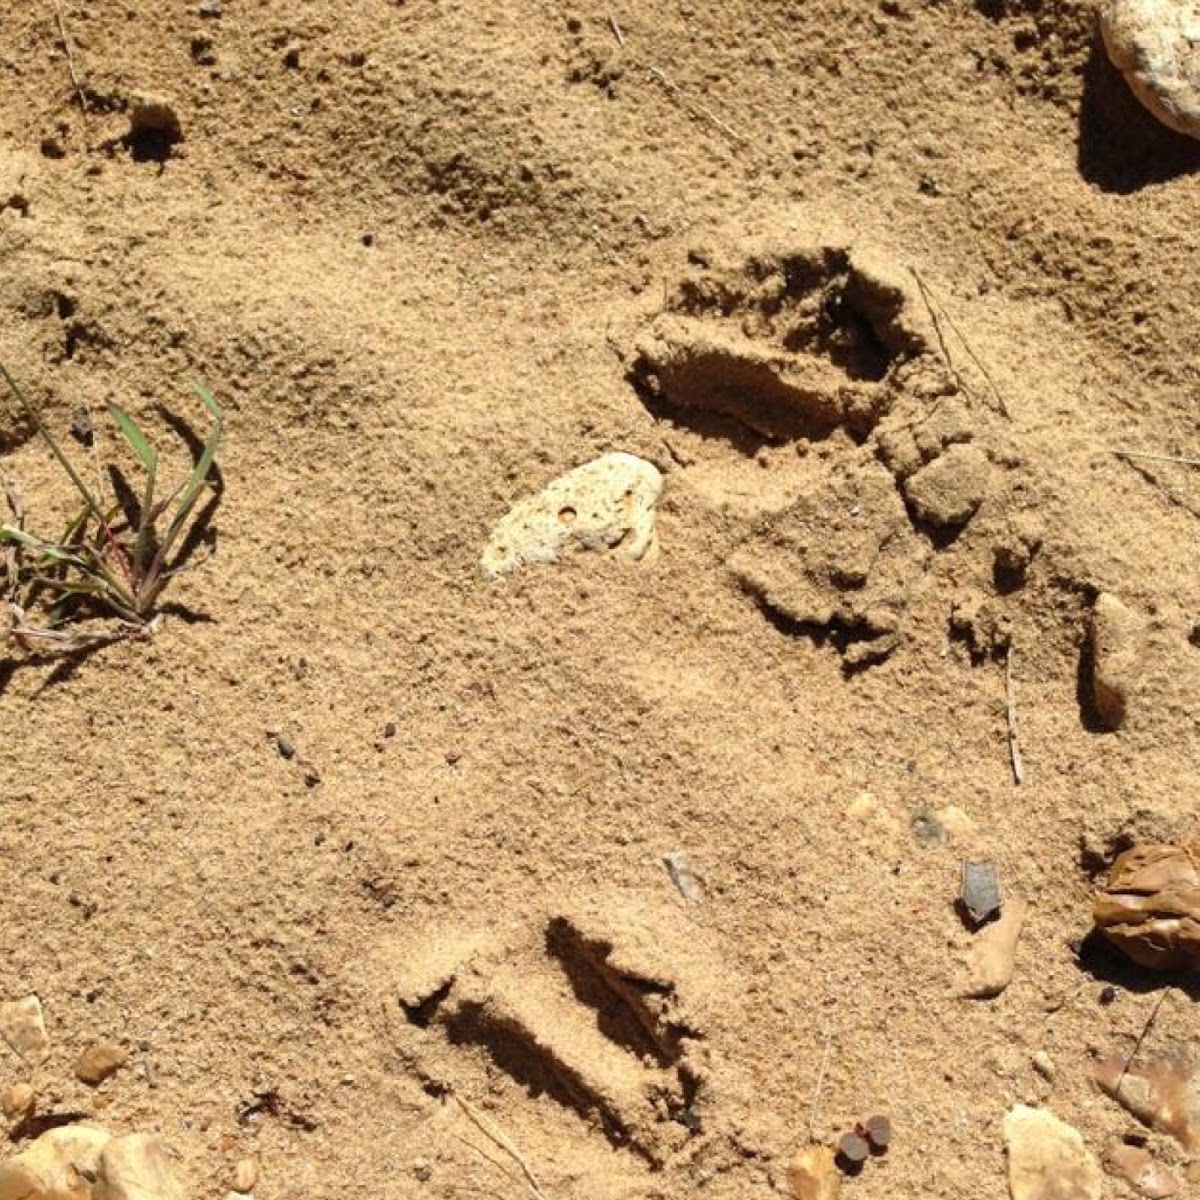 White tail deer track